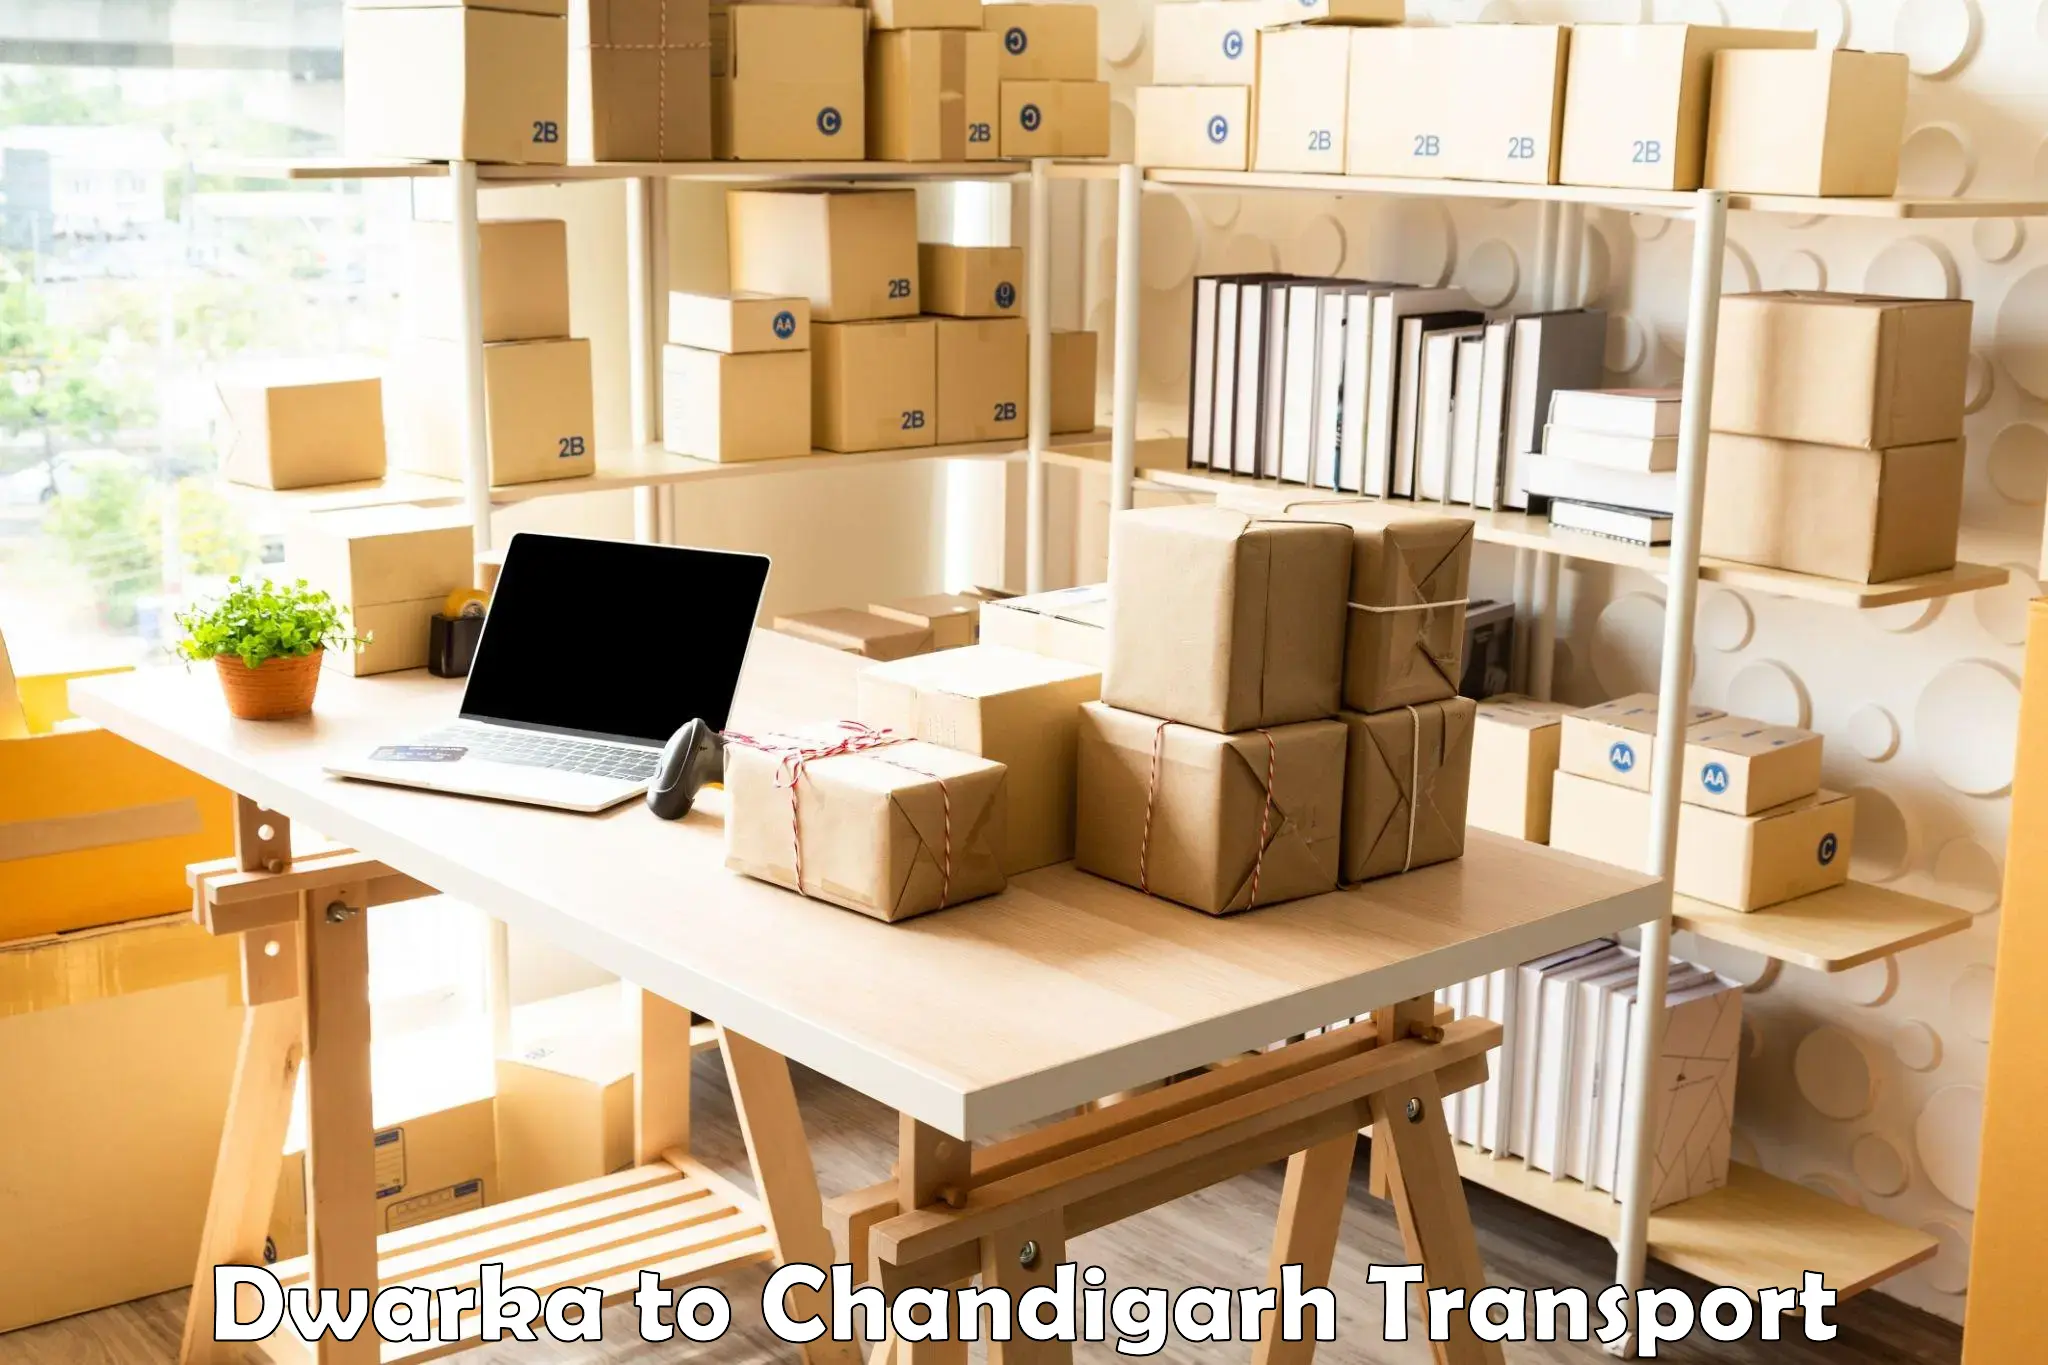 Air freight transport services in Dwarka to Chandigarh